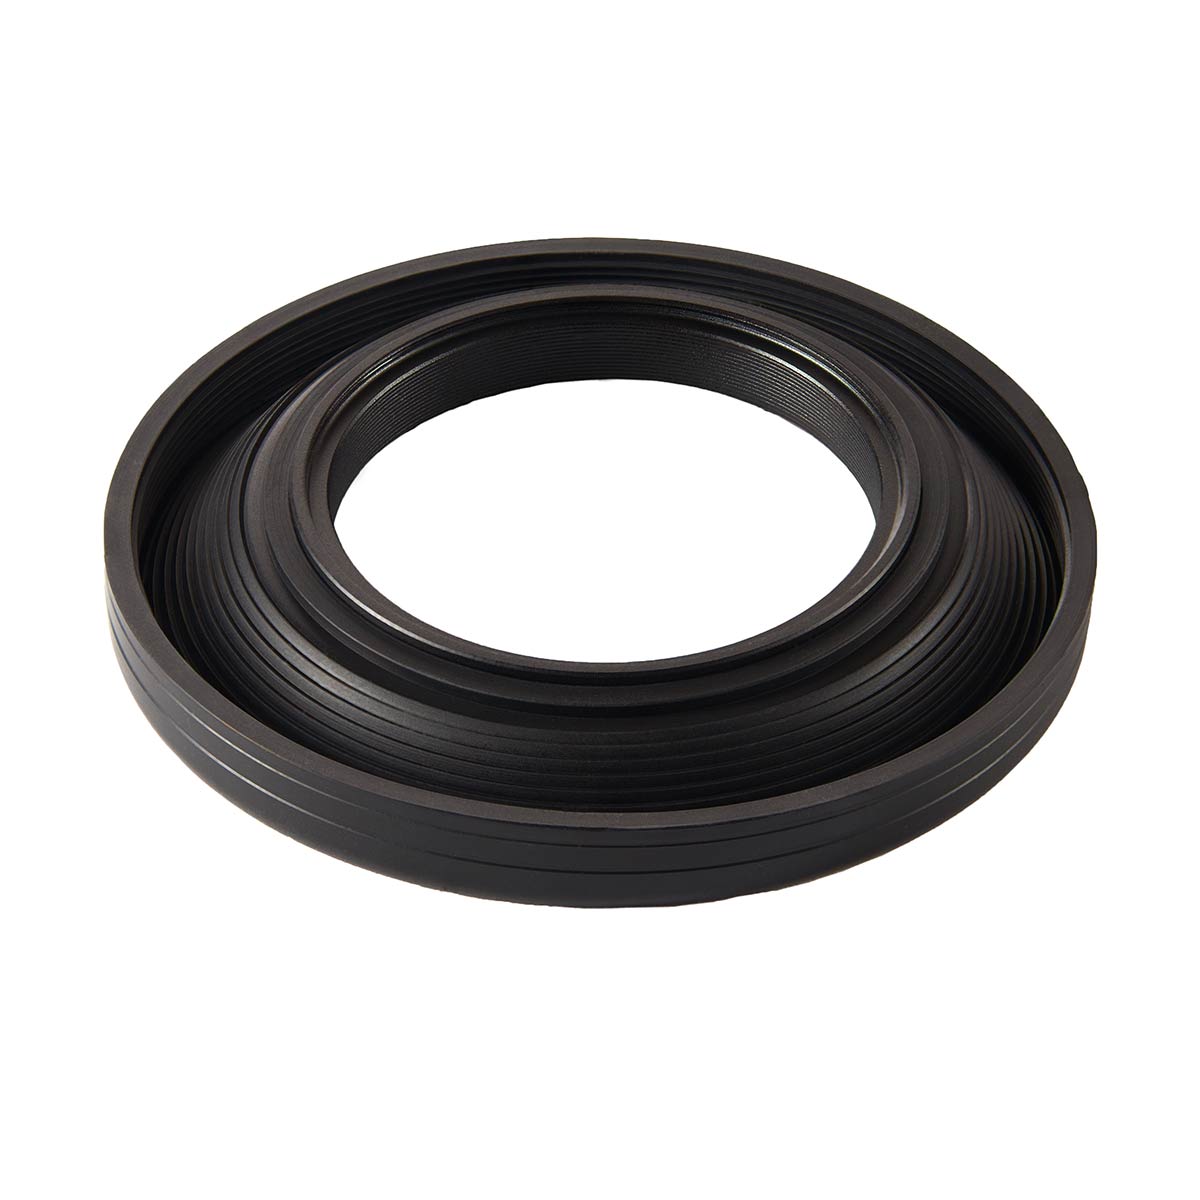 ProMaster Wide Angle Rubber Lens Hood - 52mm